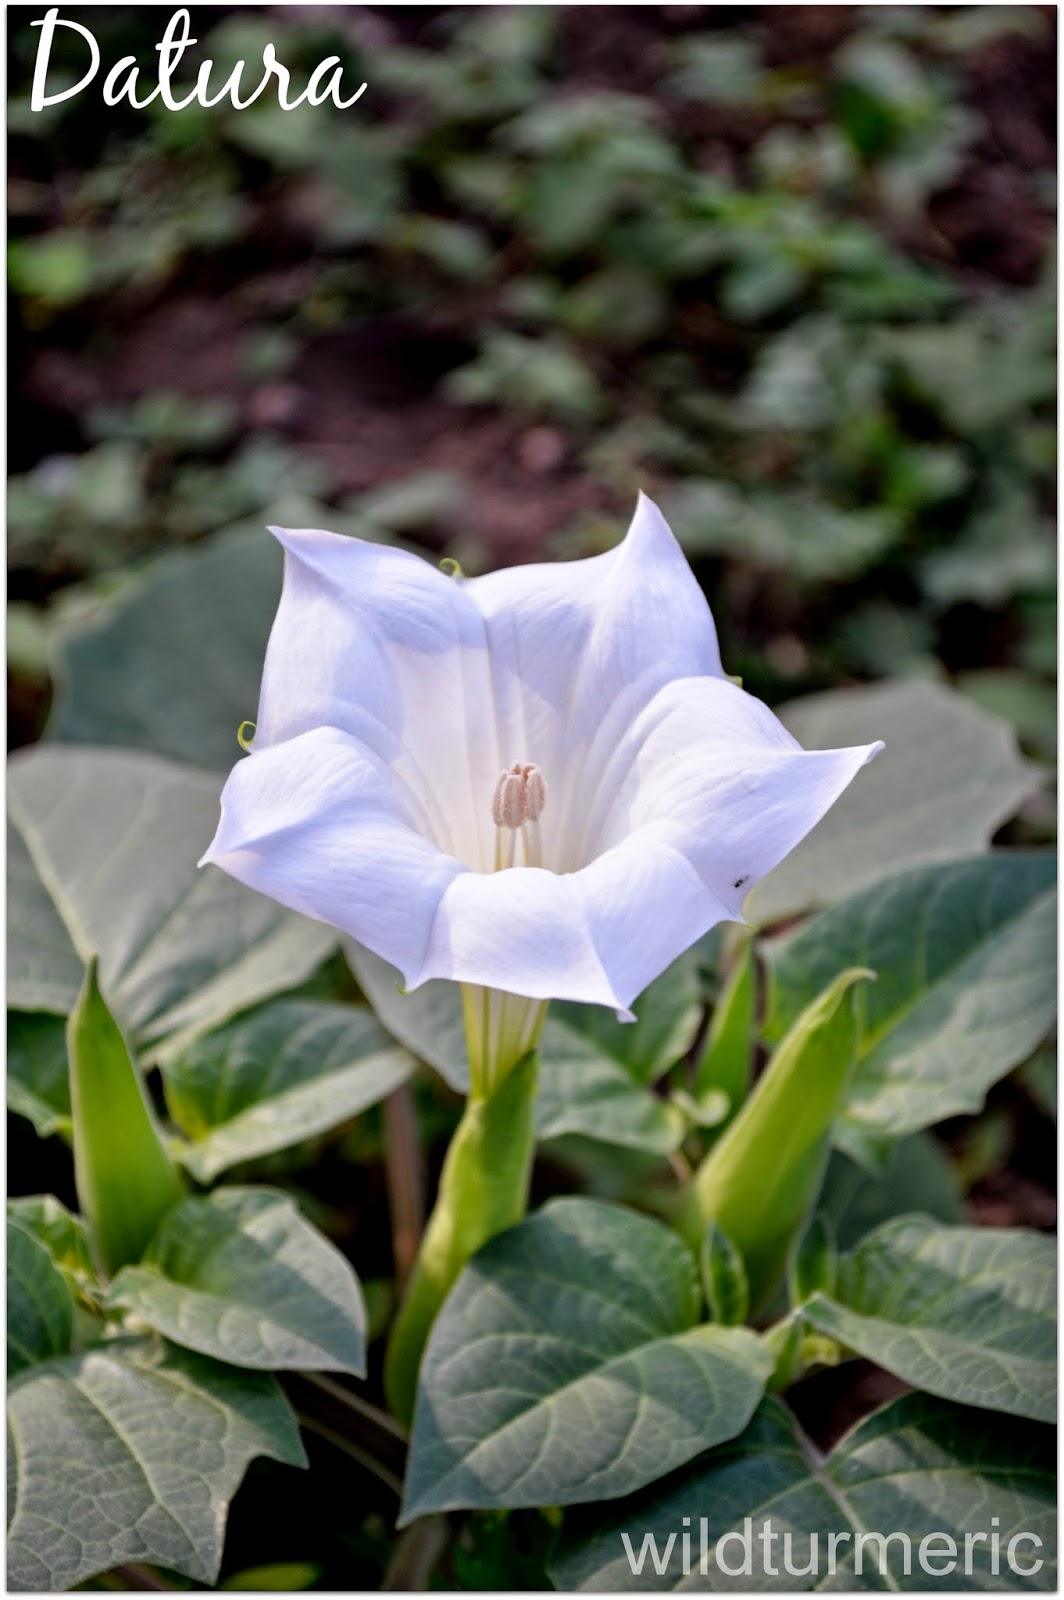 Health Benefits, Uses & Side Effects of Datura Flowers, Seeds & Leaves